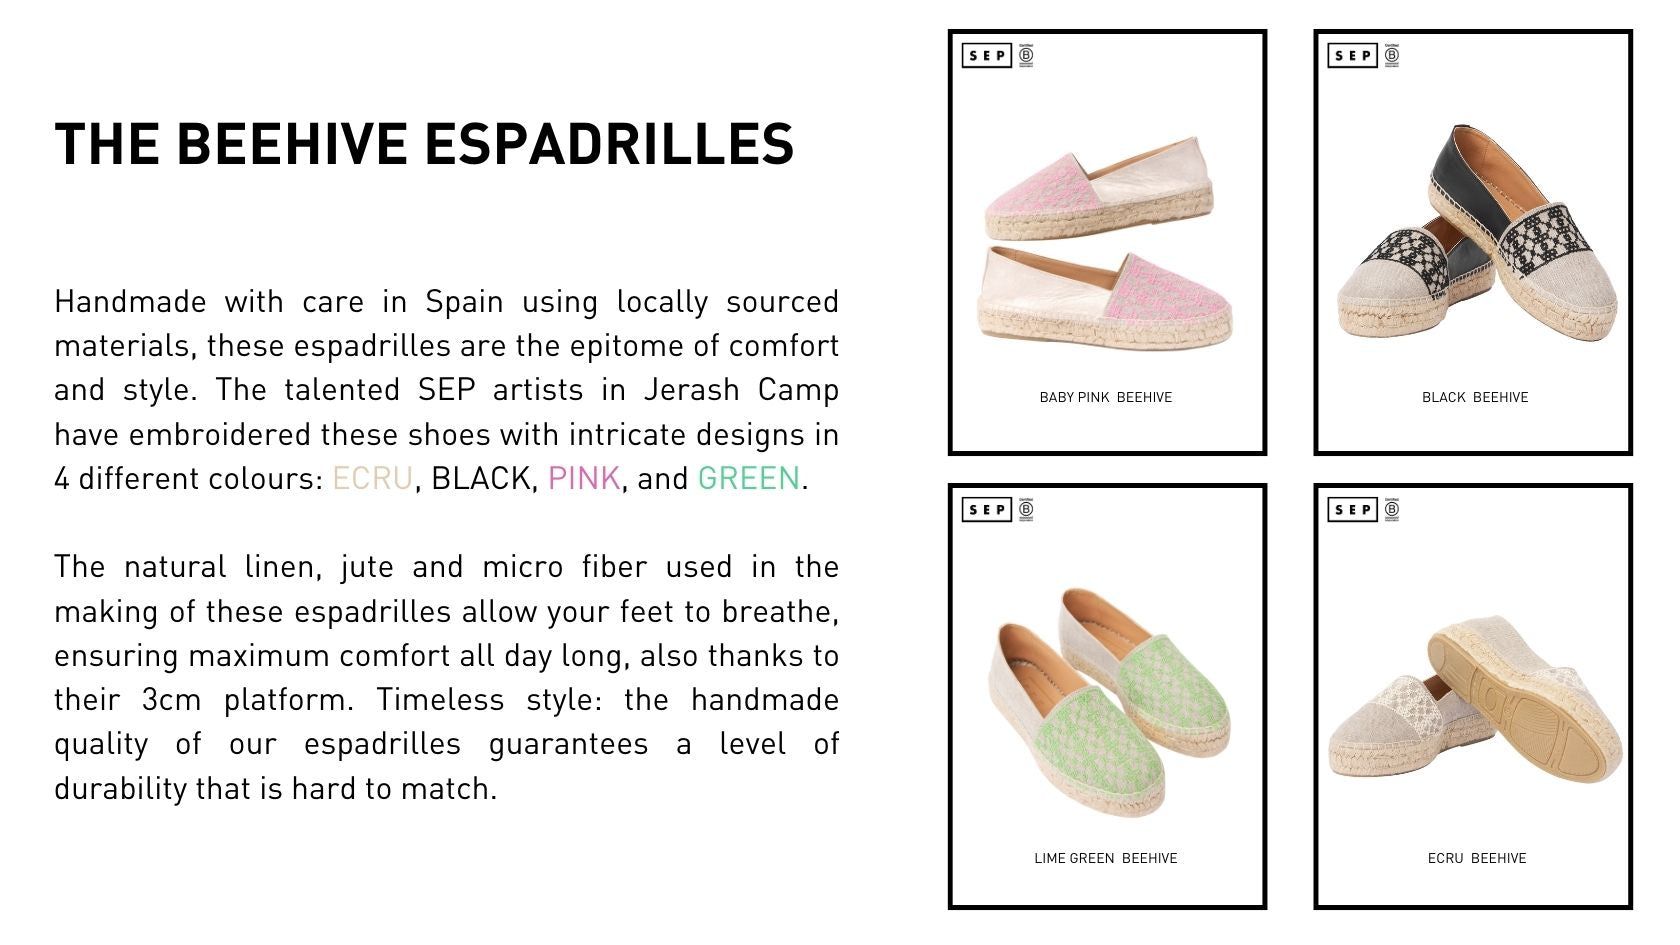 Handmade with care in Spain using locally sourced materials, these espadrilles are the epitome of comfort and style. The talented SEP artists in Jerash Camp have embroidered these shoes with intricate designs in 4 different colours: ECRU, BLACK, PINK, and GREEN.  The natural linen, jute and micro fiber used in the making of these espadrilles allow your feet to breathe, ensuring maximum comfort all day long, also thanks to their 3cm platform. Timeless style: the handmade quality of our espadrilles guarantees a level of durability that is hard to match.